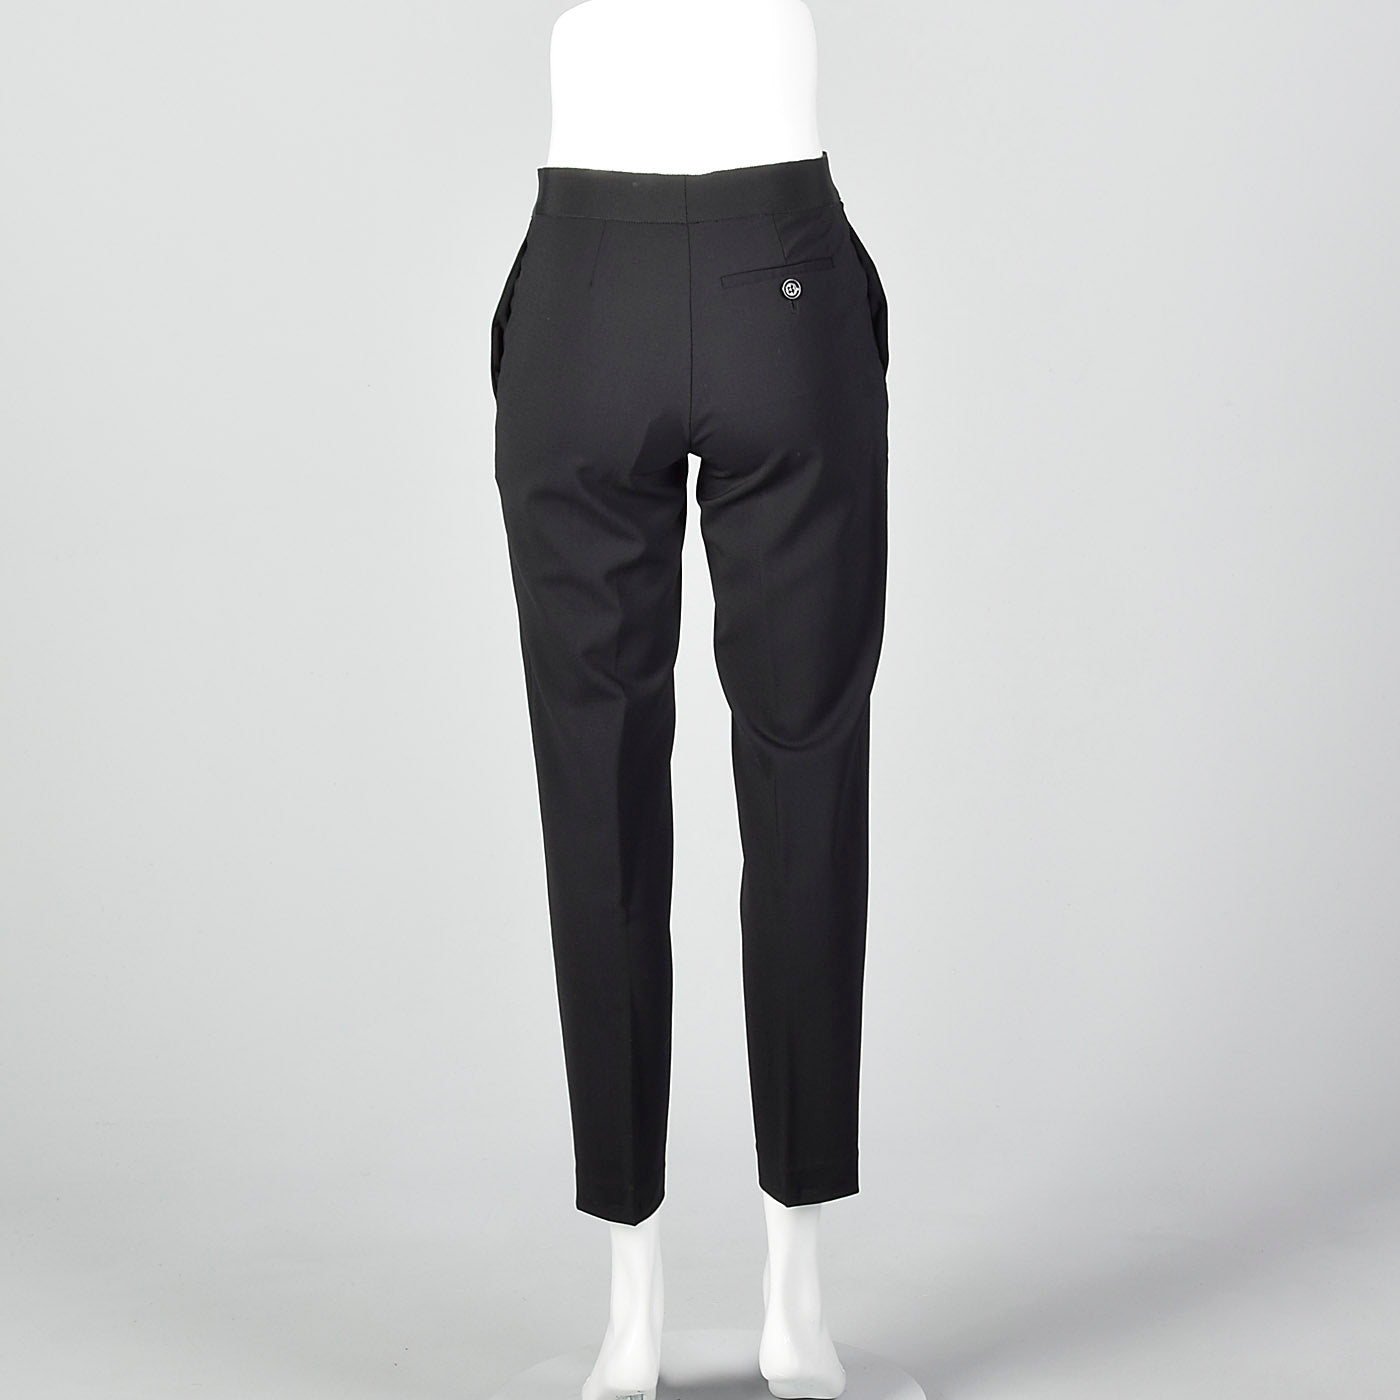 2000s Low Rise Black Pants with Bow Waist